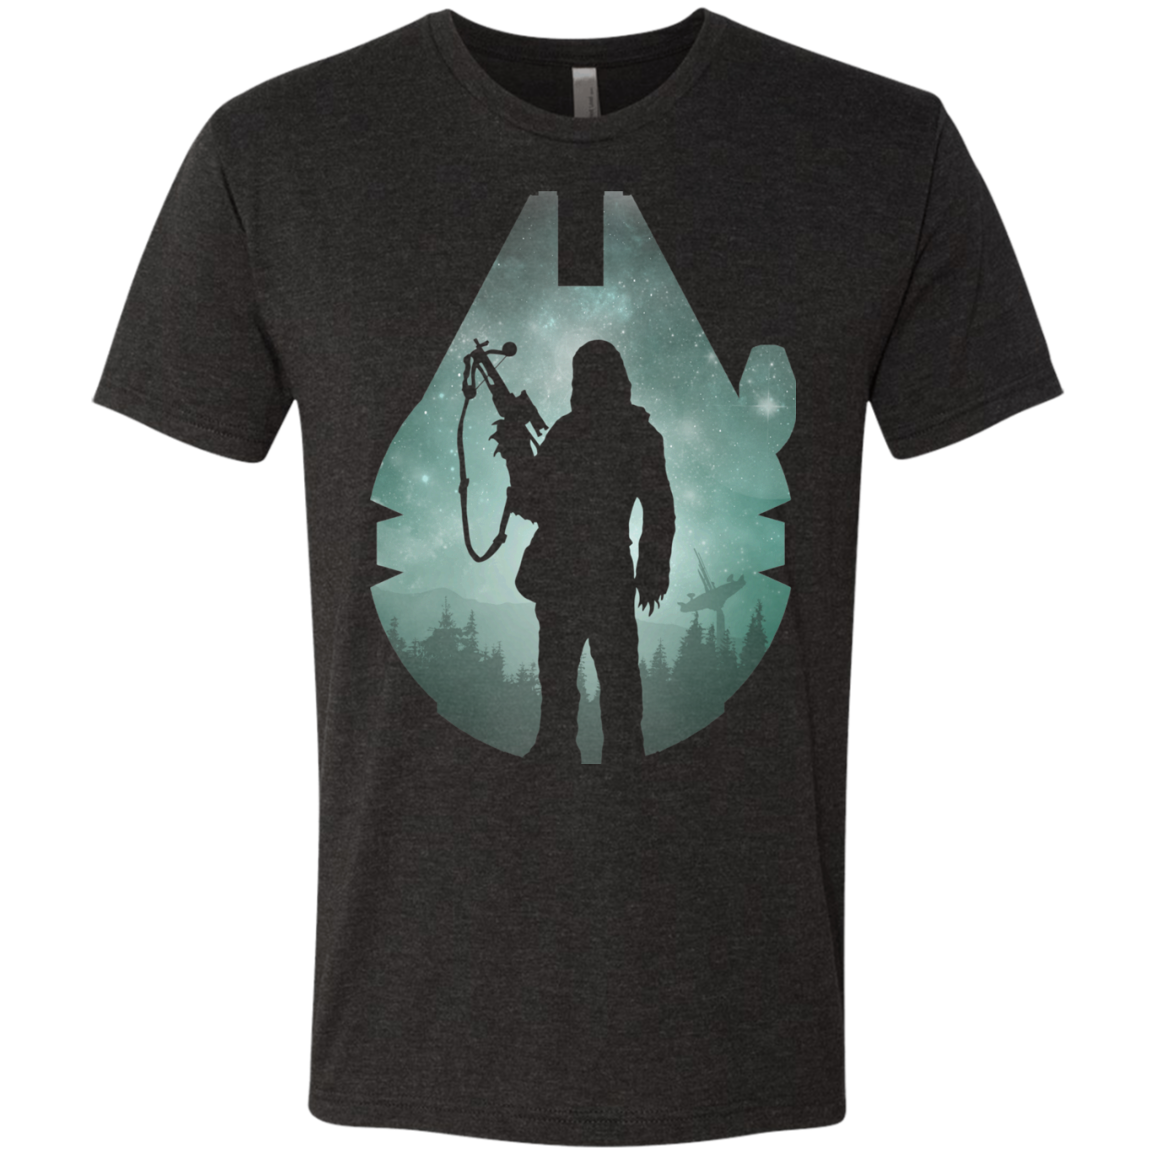 The Wookiee Men's Triblend T-Shirt